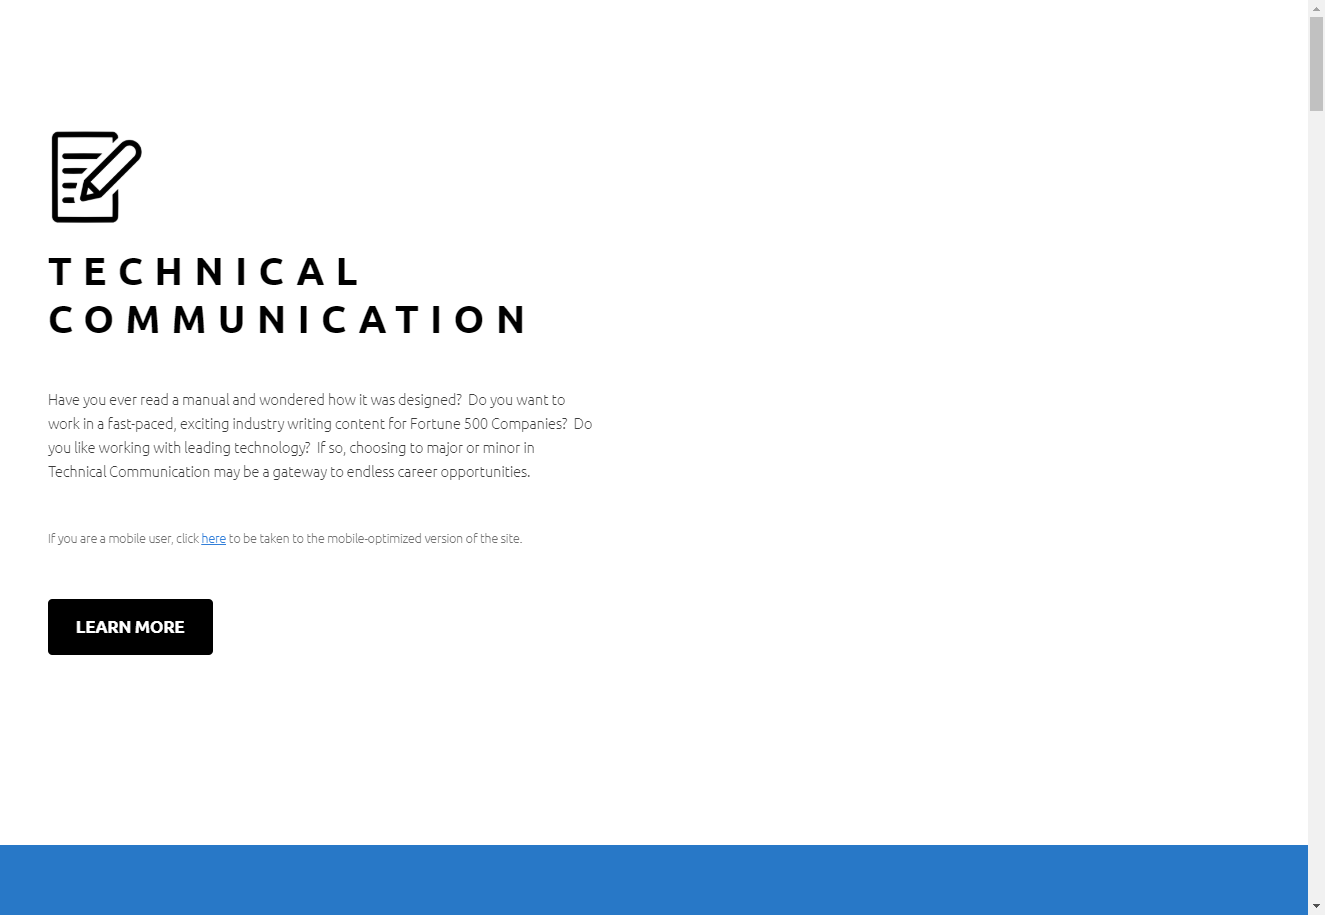 Aspects of Technical Communication